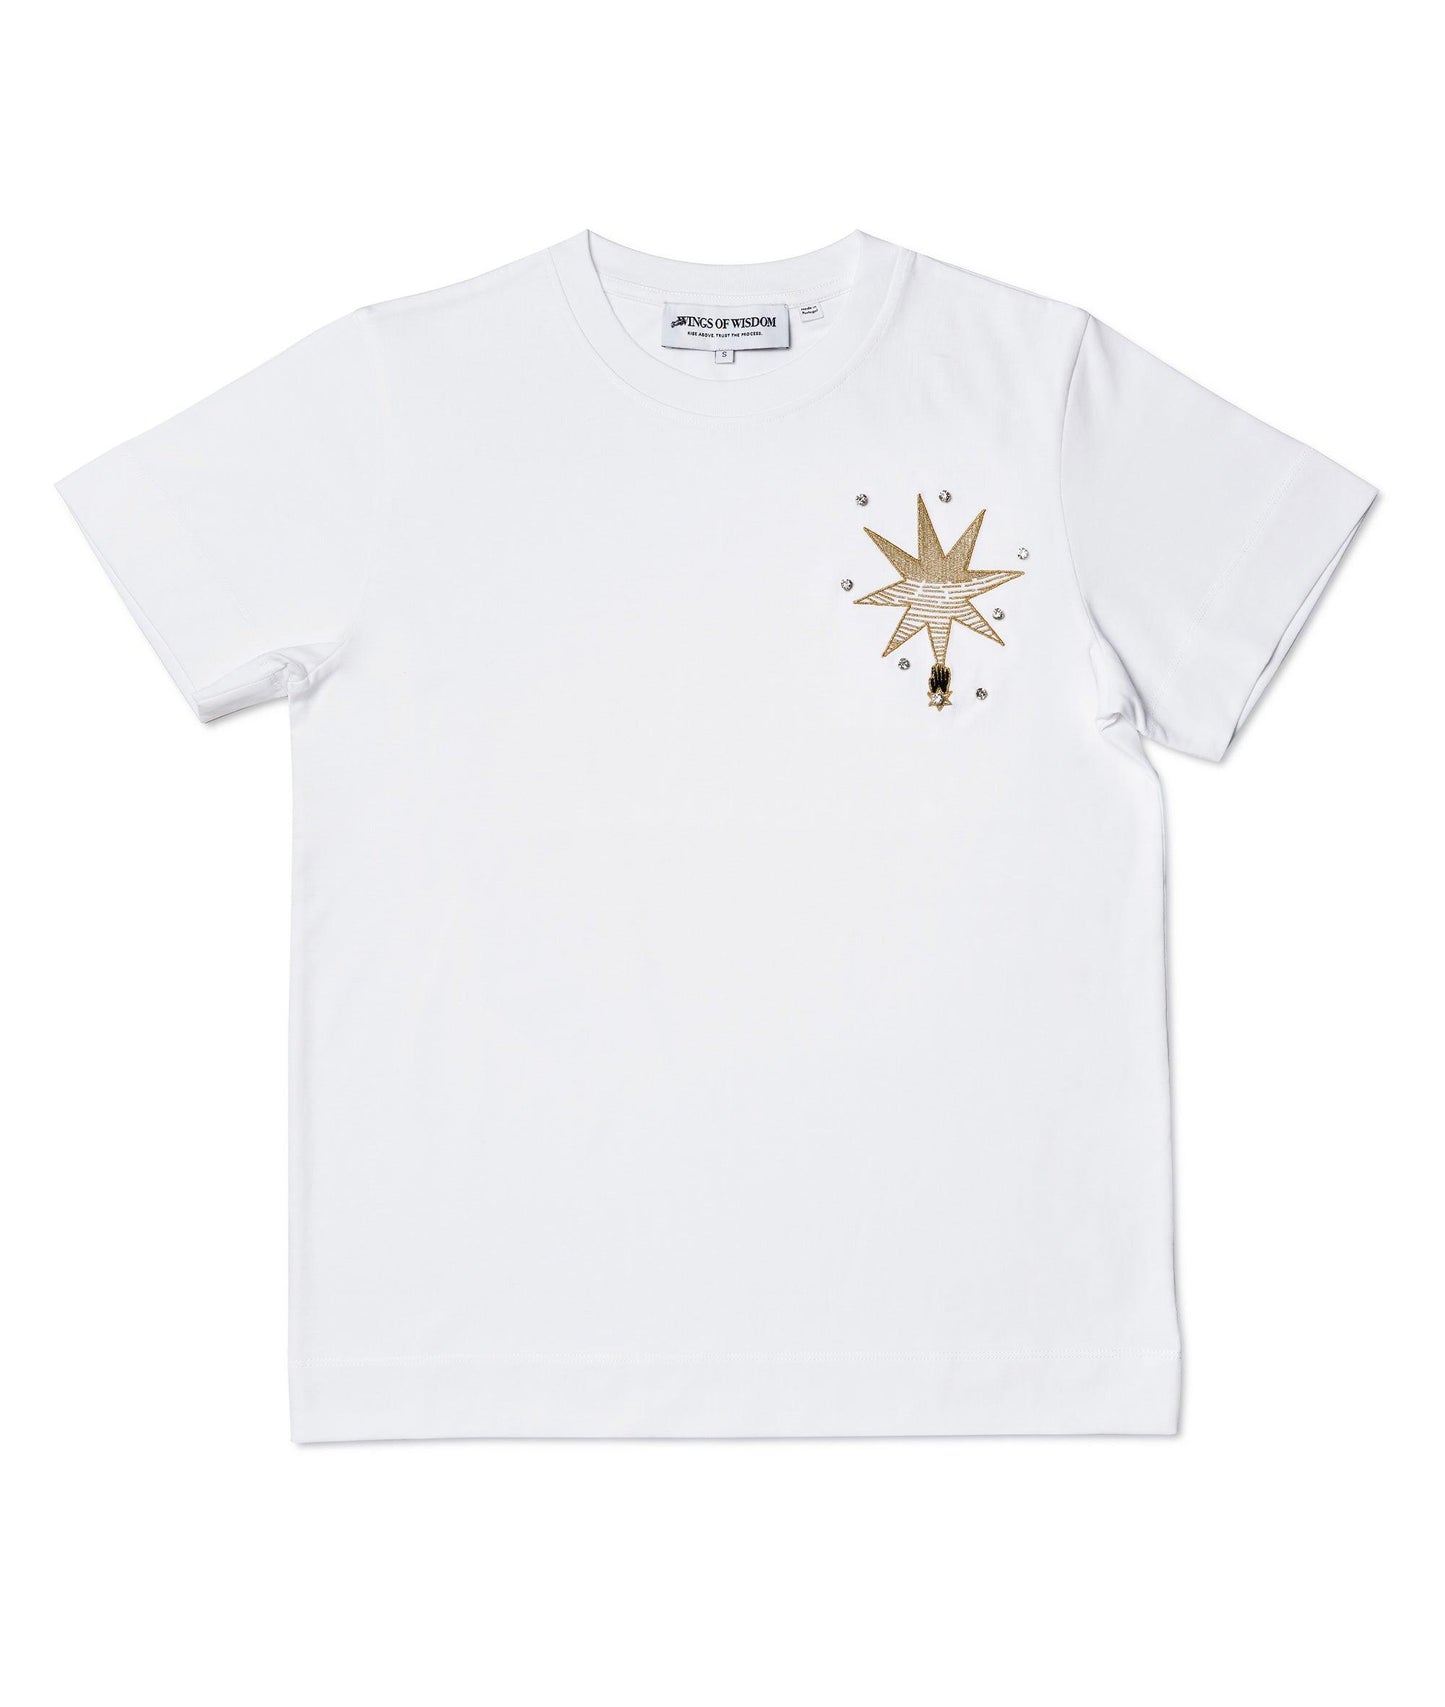 'Hand Me A Star' White T-Shirt - Wing of Wisdom